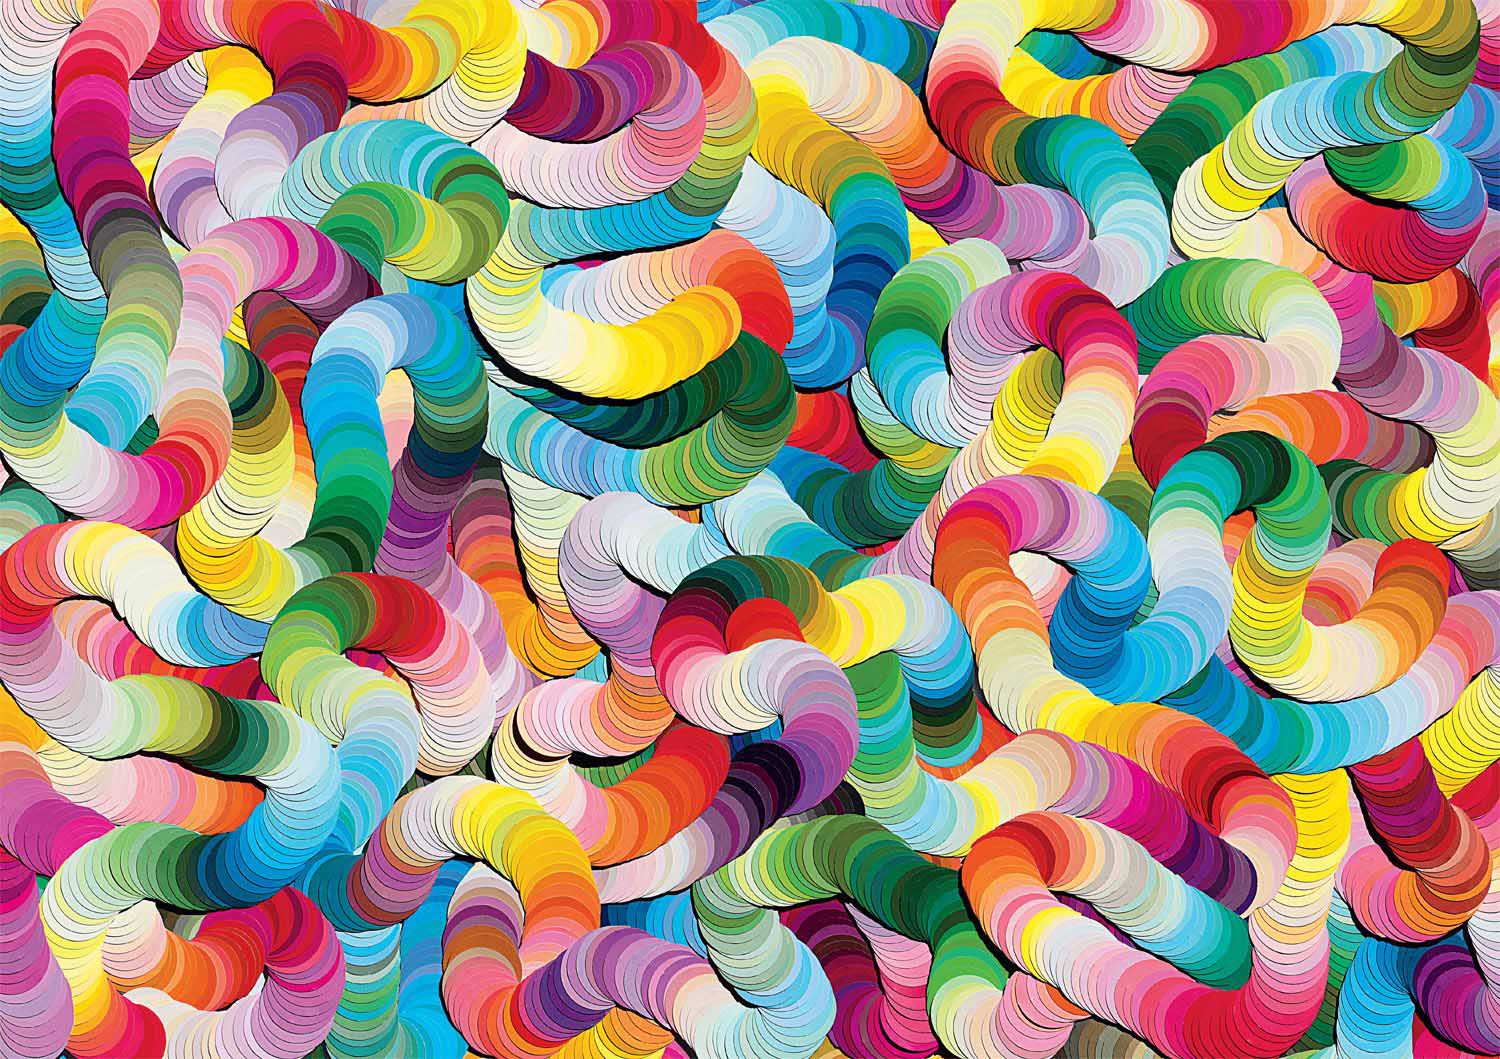 Slither Abstract Jigsaw Puzzle